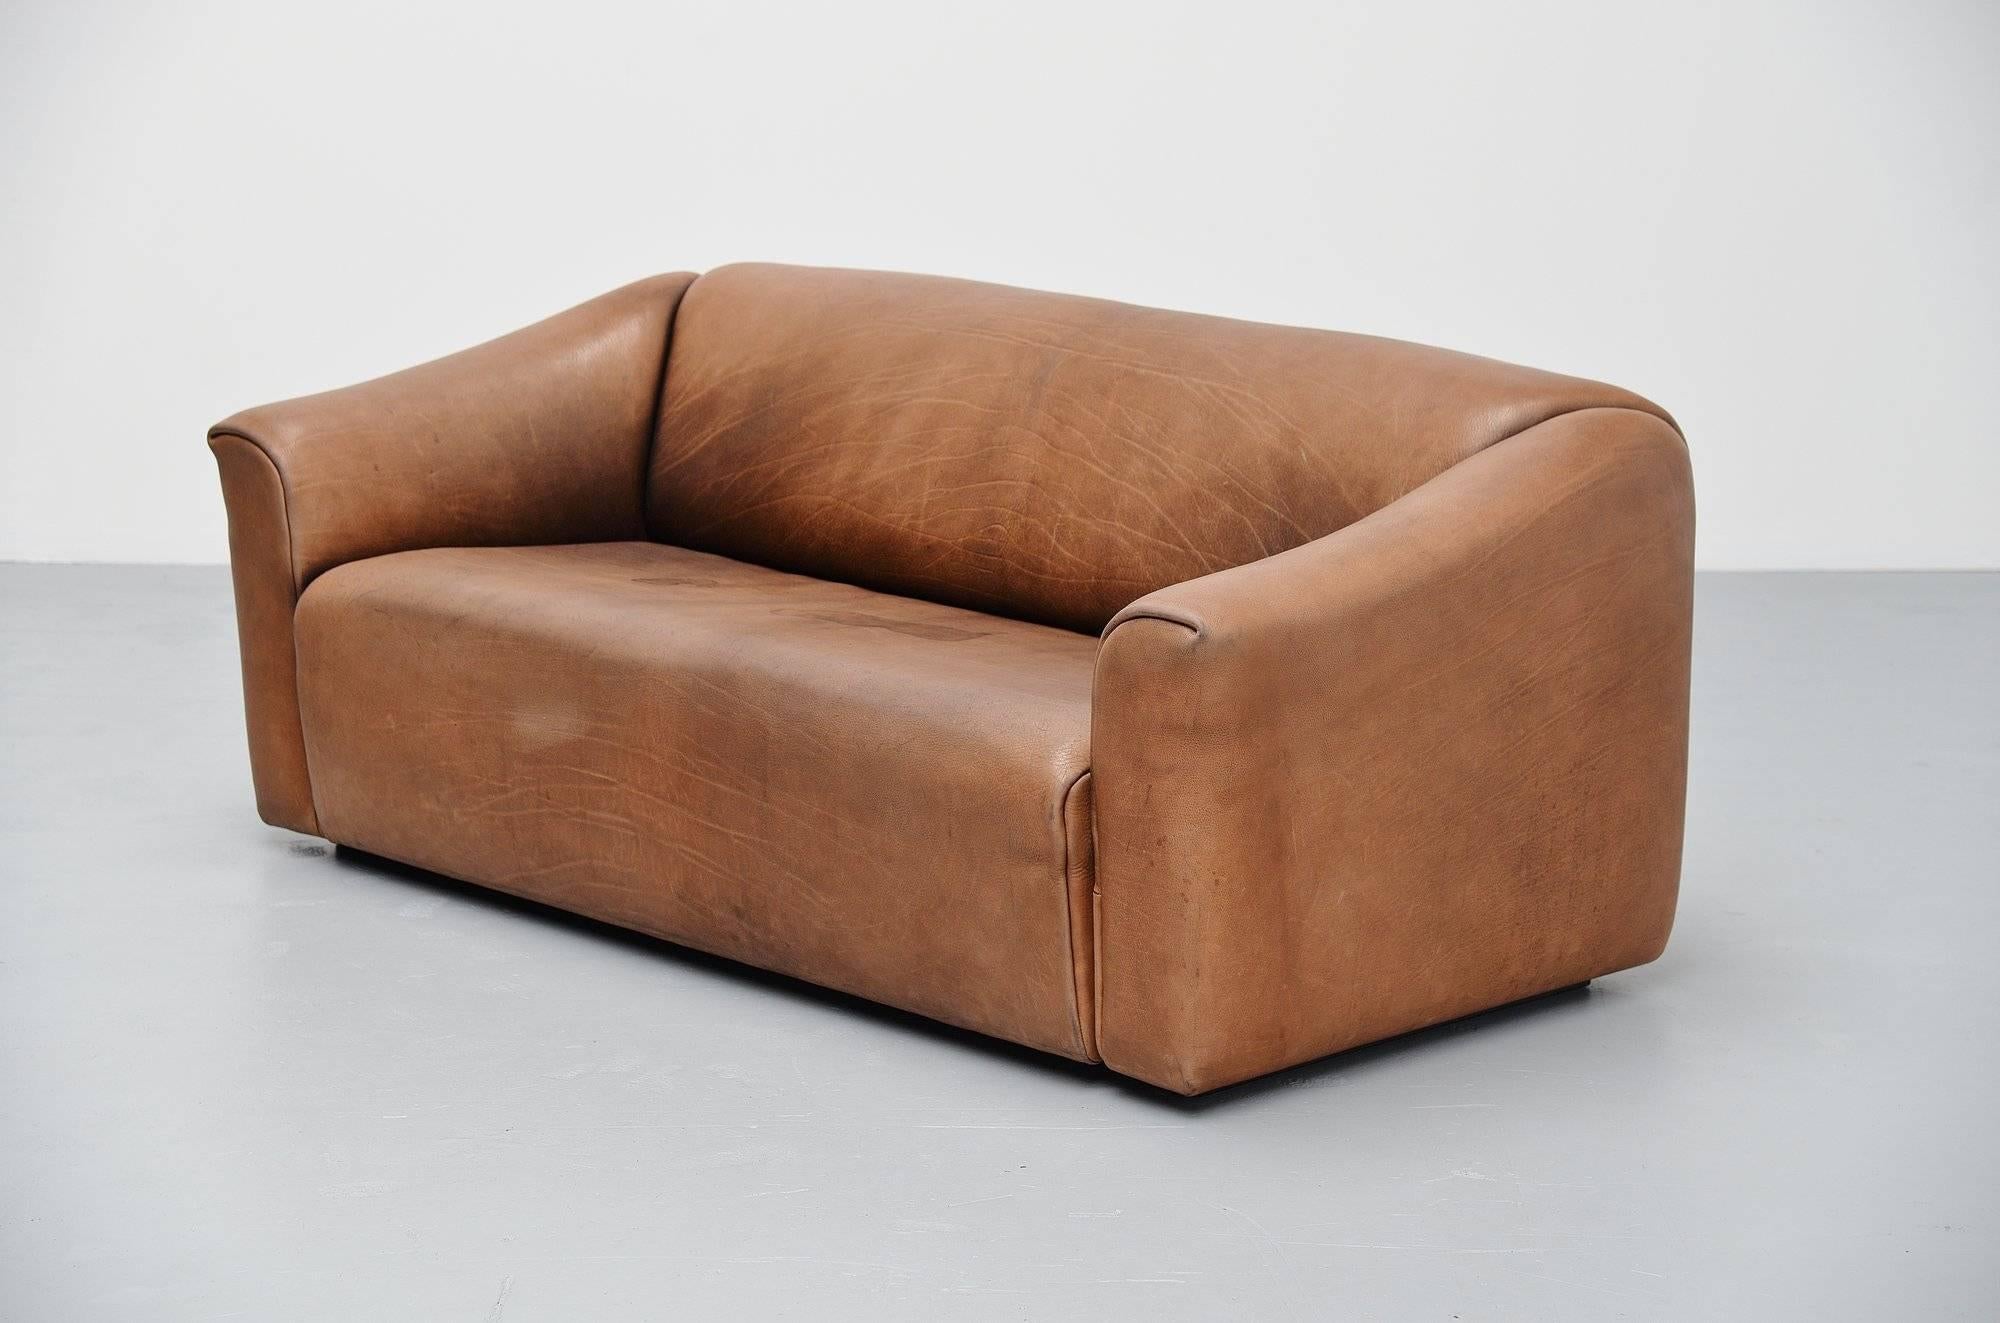 Very nice old version of the DS47 sofa designed and manufactured by De Sede, Switzerland, 1970. This heavy quality sofa is made of very thick buffalo leather of the best quality. De Sede is well-known for its quality seating and comfortable seating